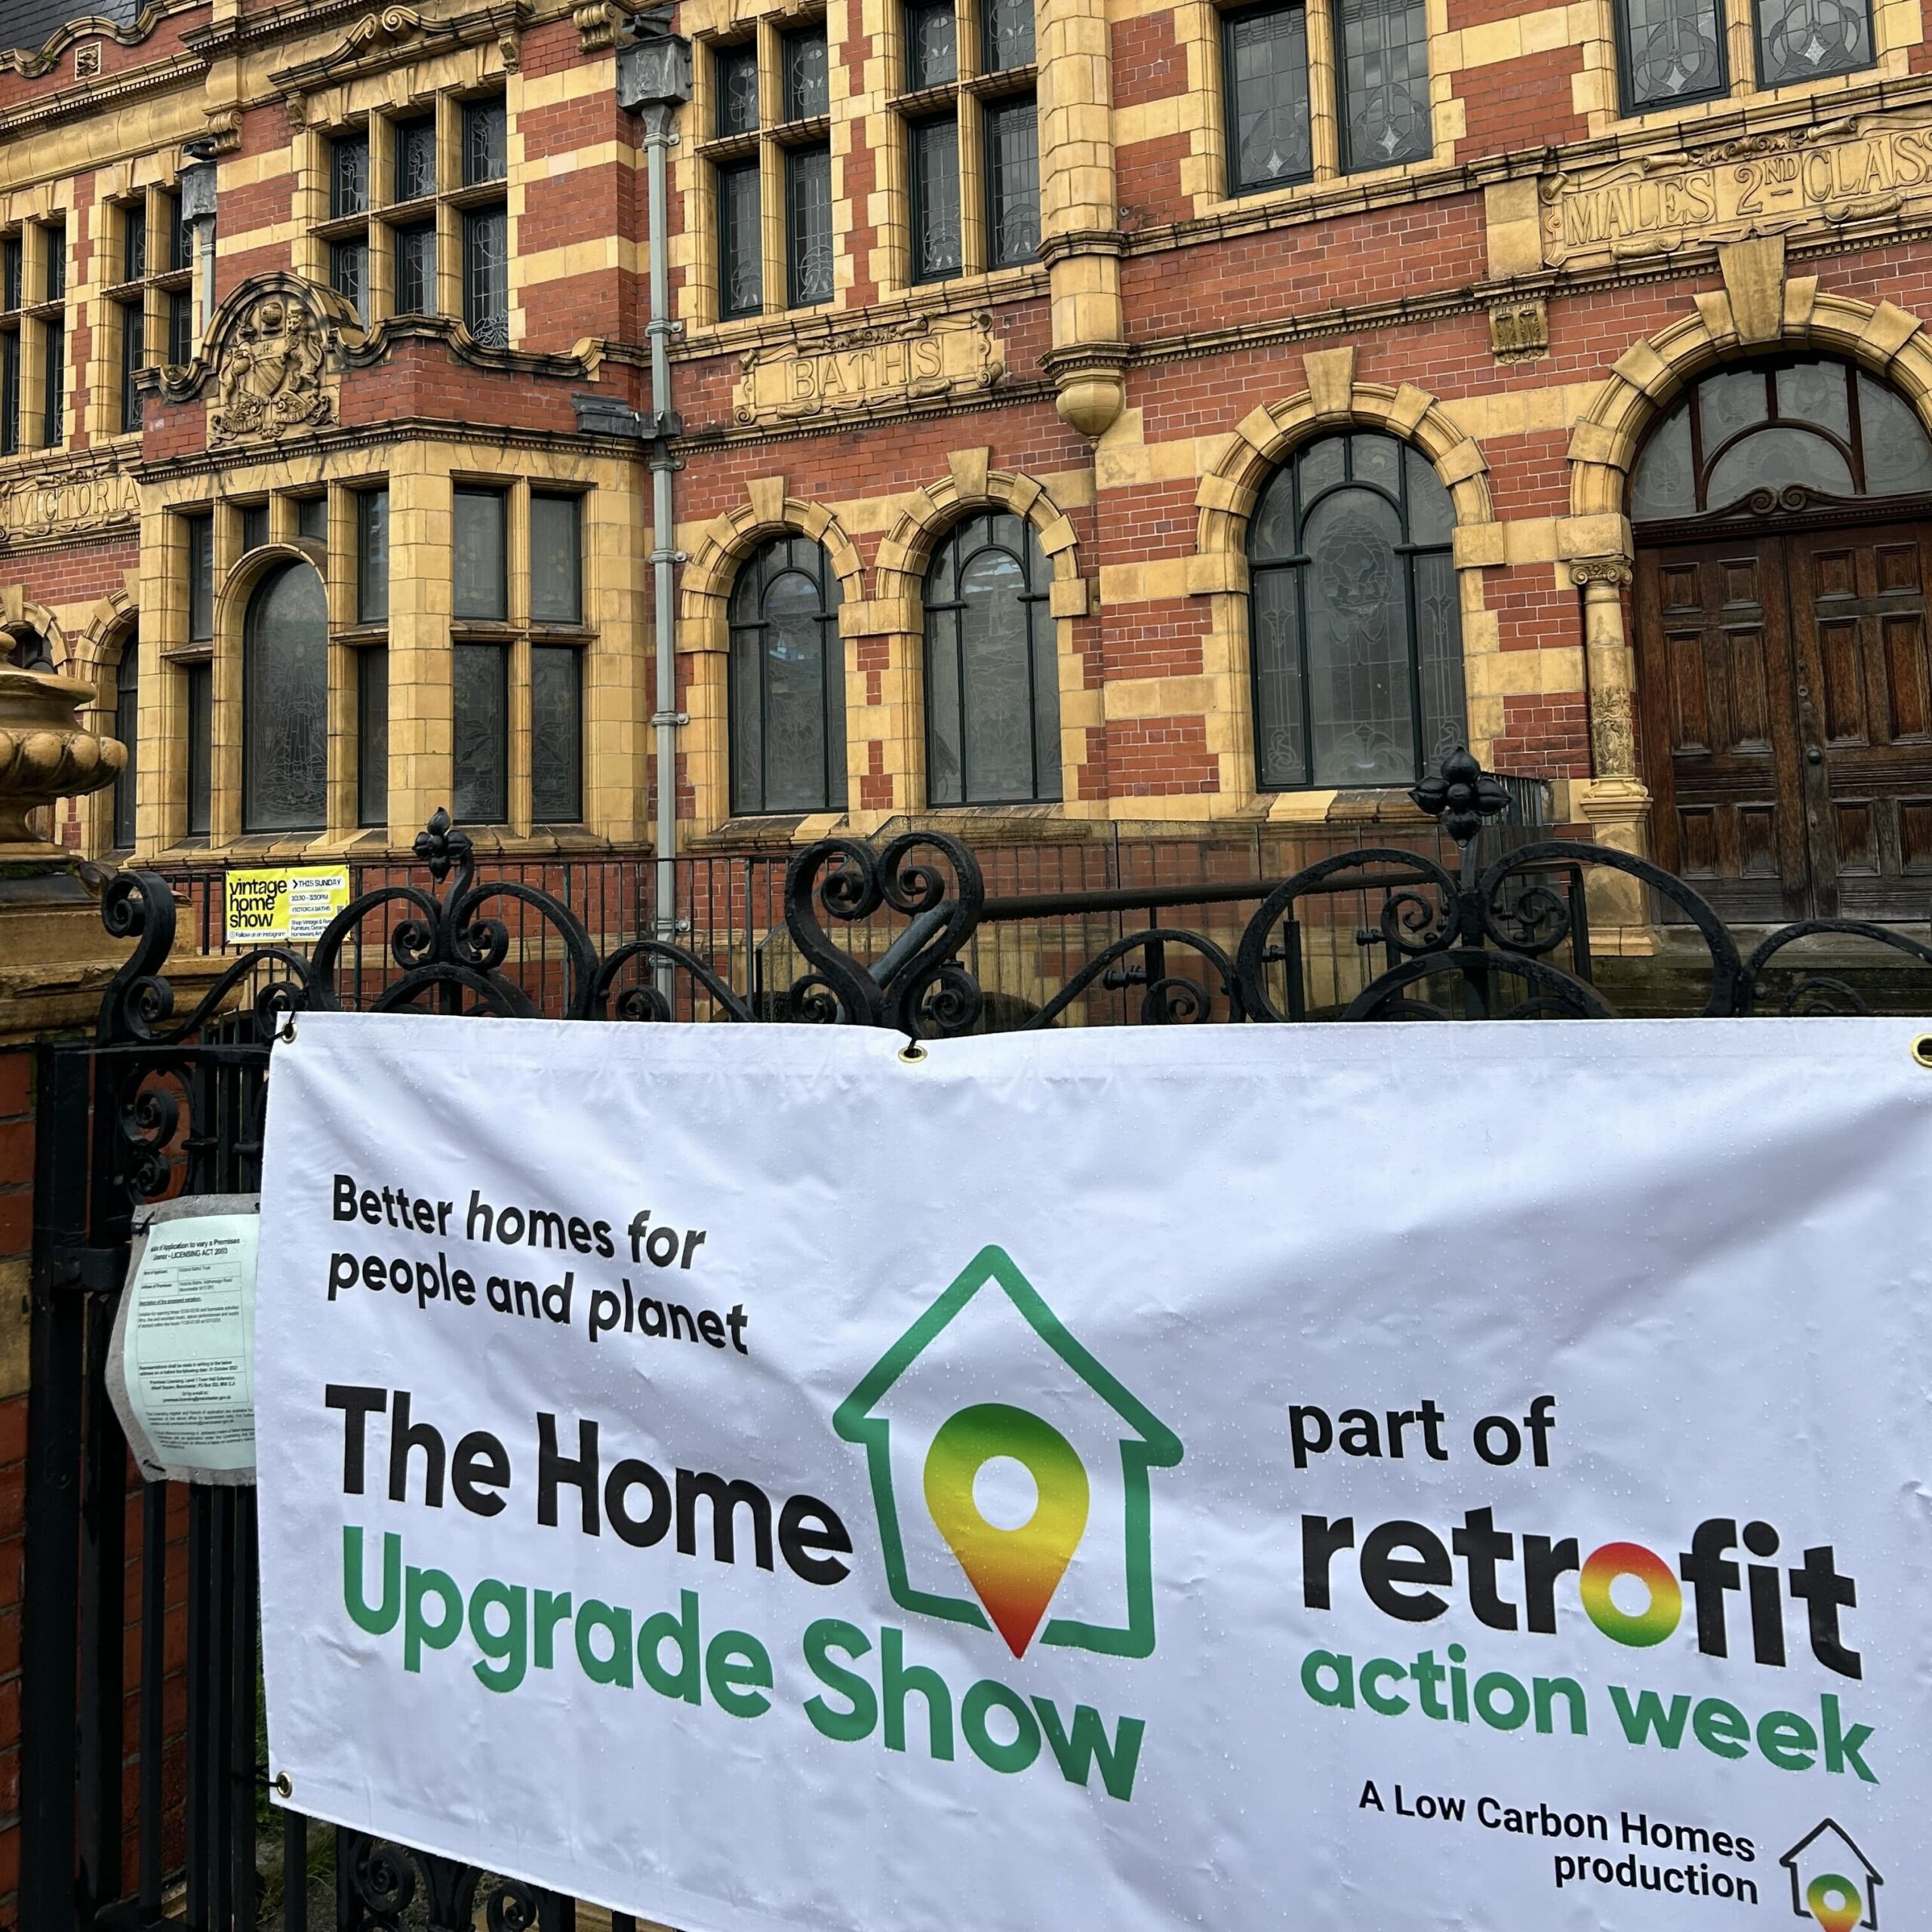 Low Carbon Homes’ Home Upgrade Show: Innovations in Retrofit